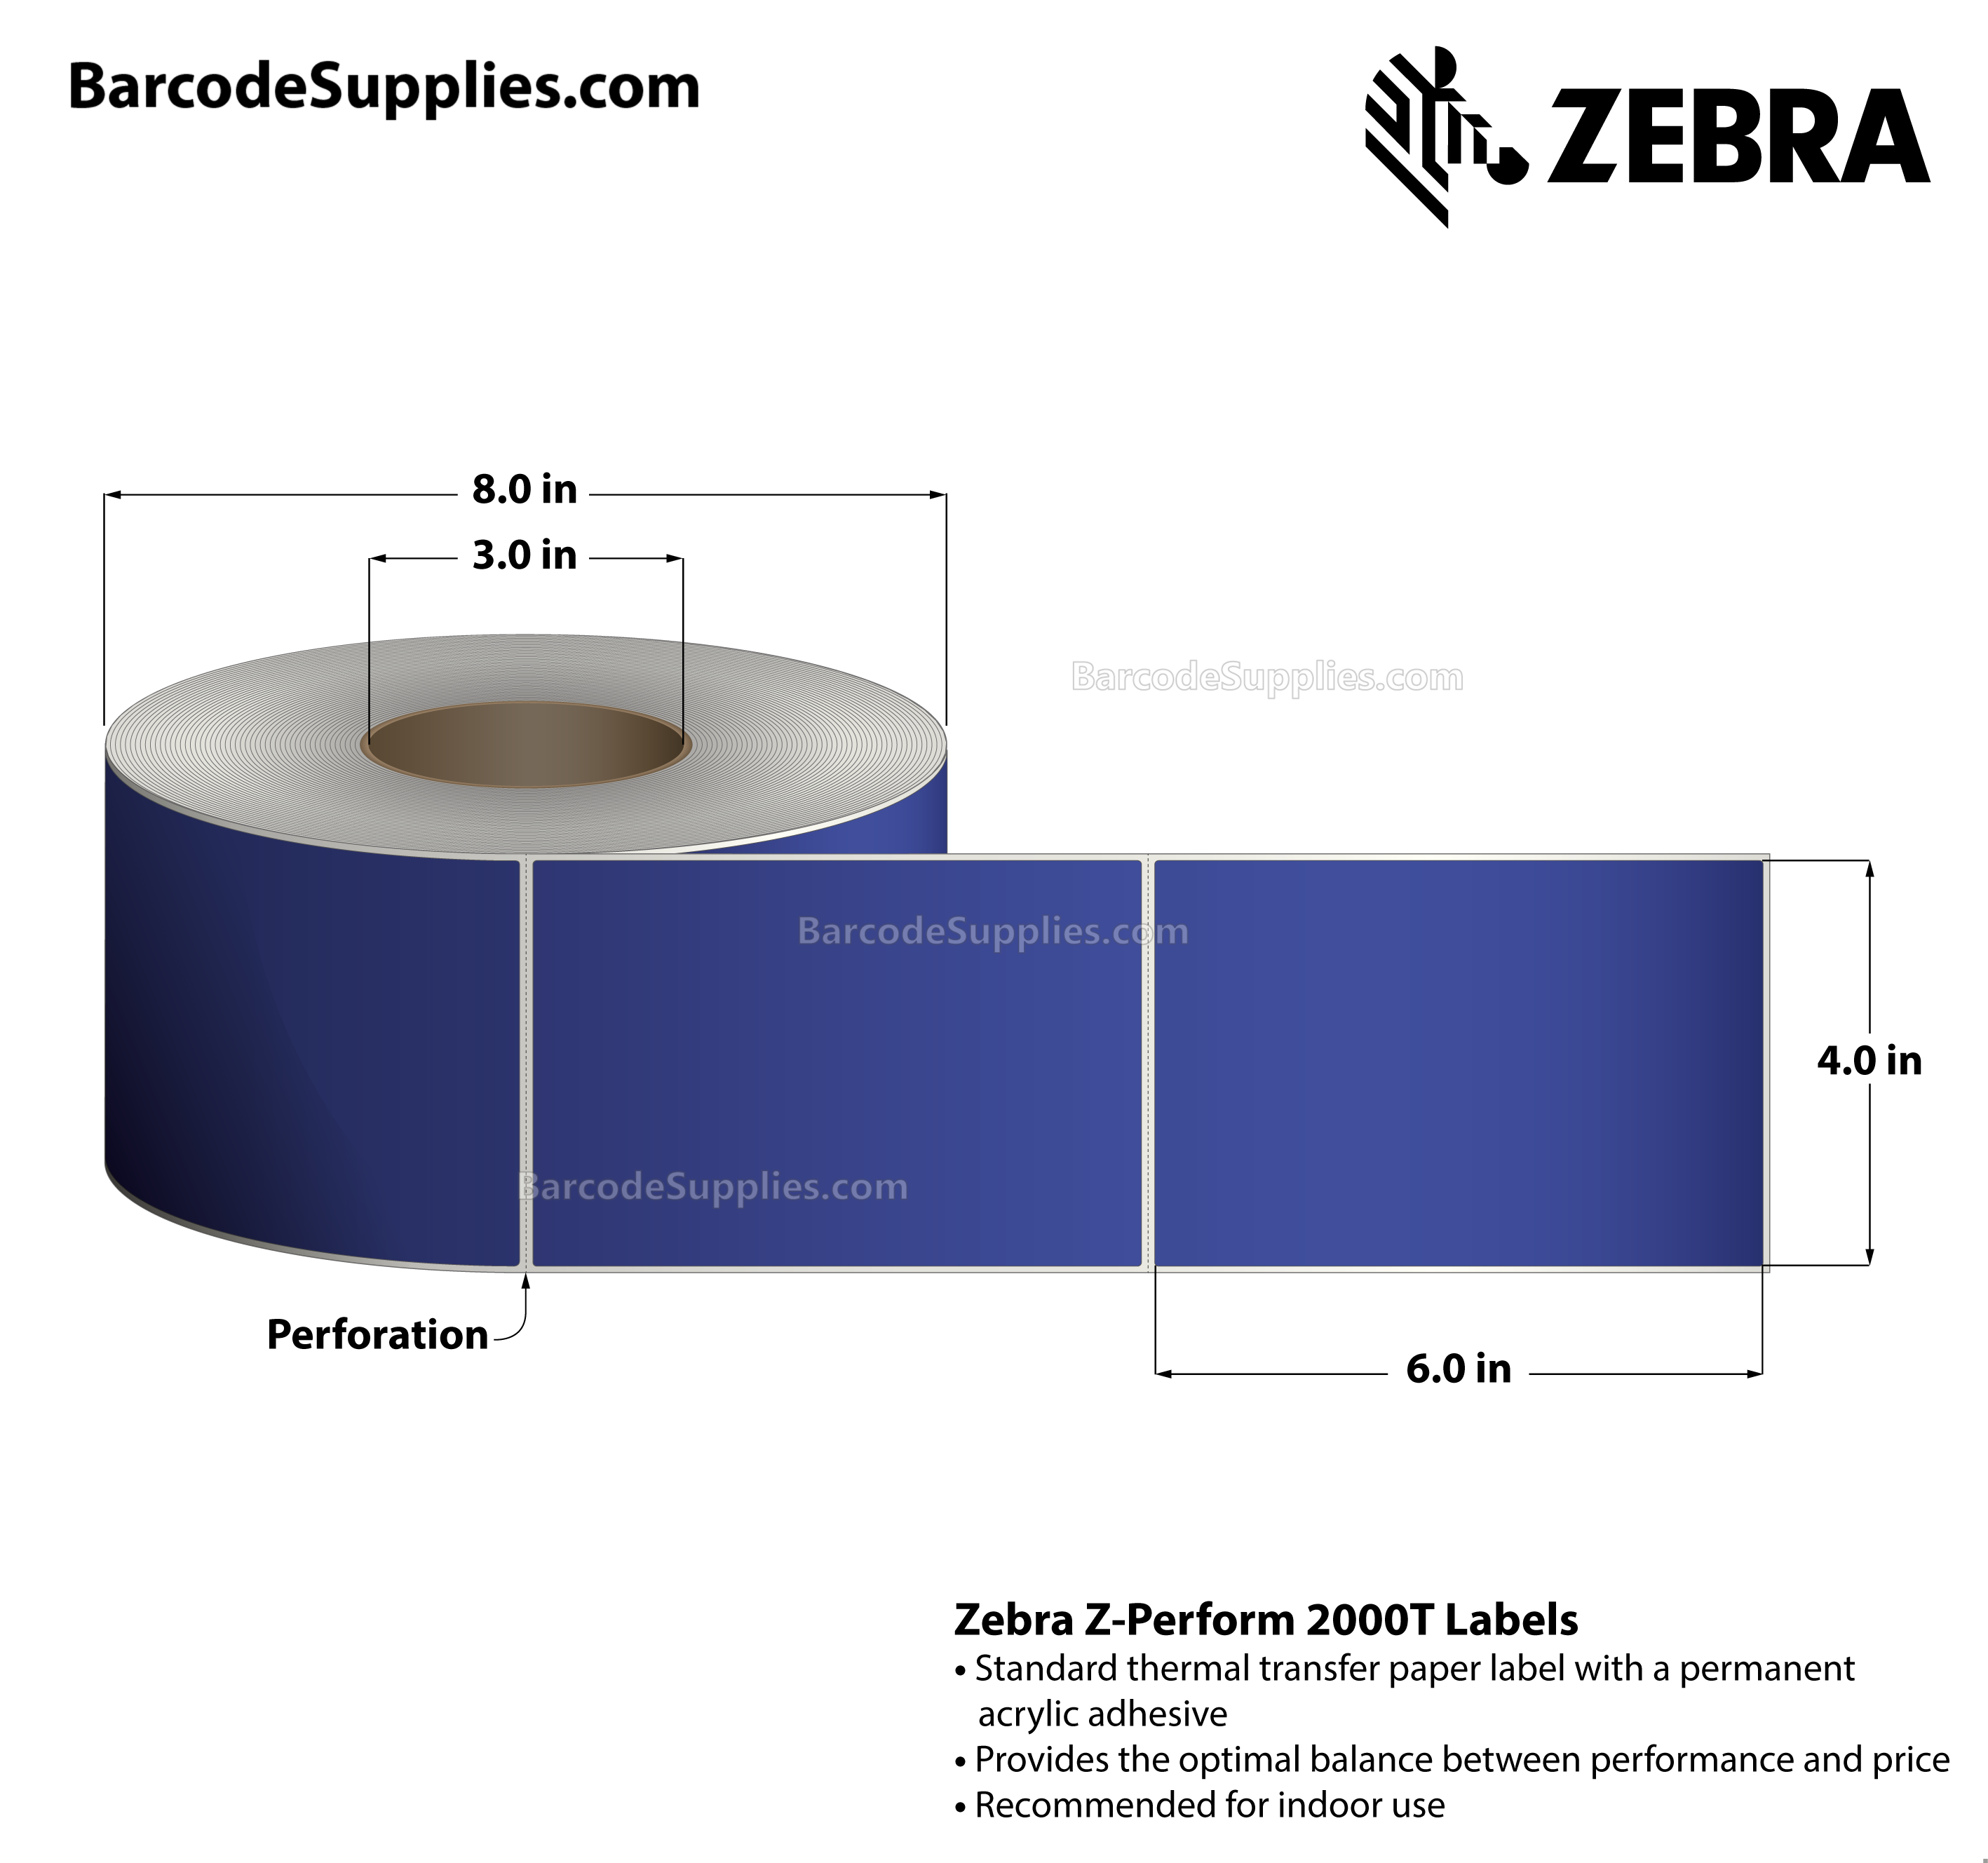 4 x 6 Thermal Transfer Blue Z-Perform 2000T Floodcoated (Blue) Labels With Permanent Adhesive - Perforated - 1000 Labels Per Roll - Carton Of 4 Rolls - 4000 Labels Total - MPN: 10006208